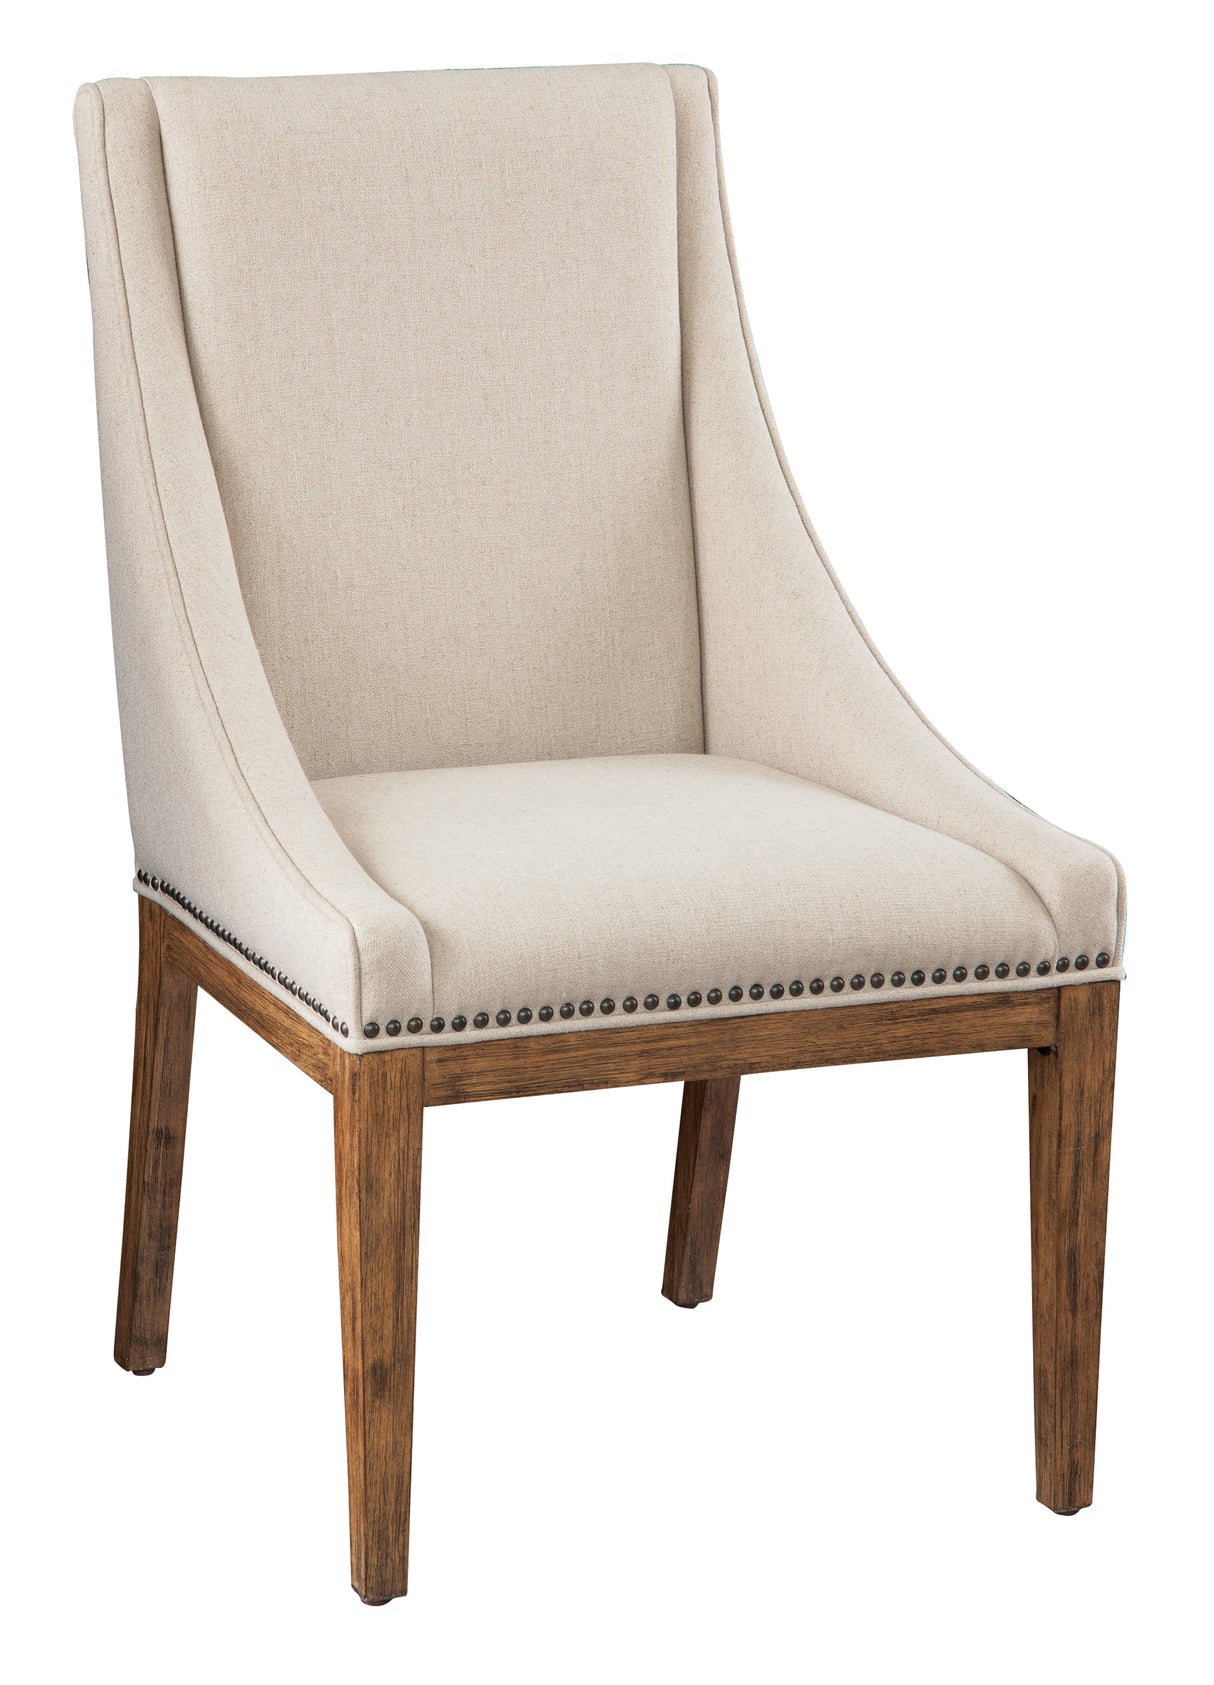 Hekman 23724 Bedford Park 24in. x 27in. x 39in. Dining Arm Chair